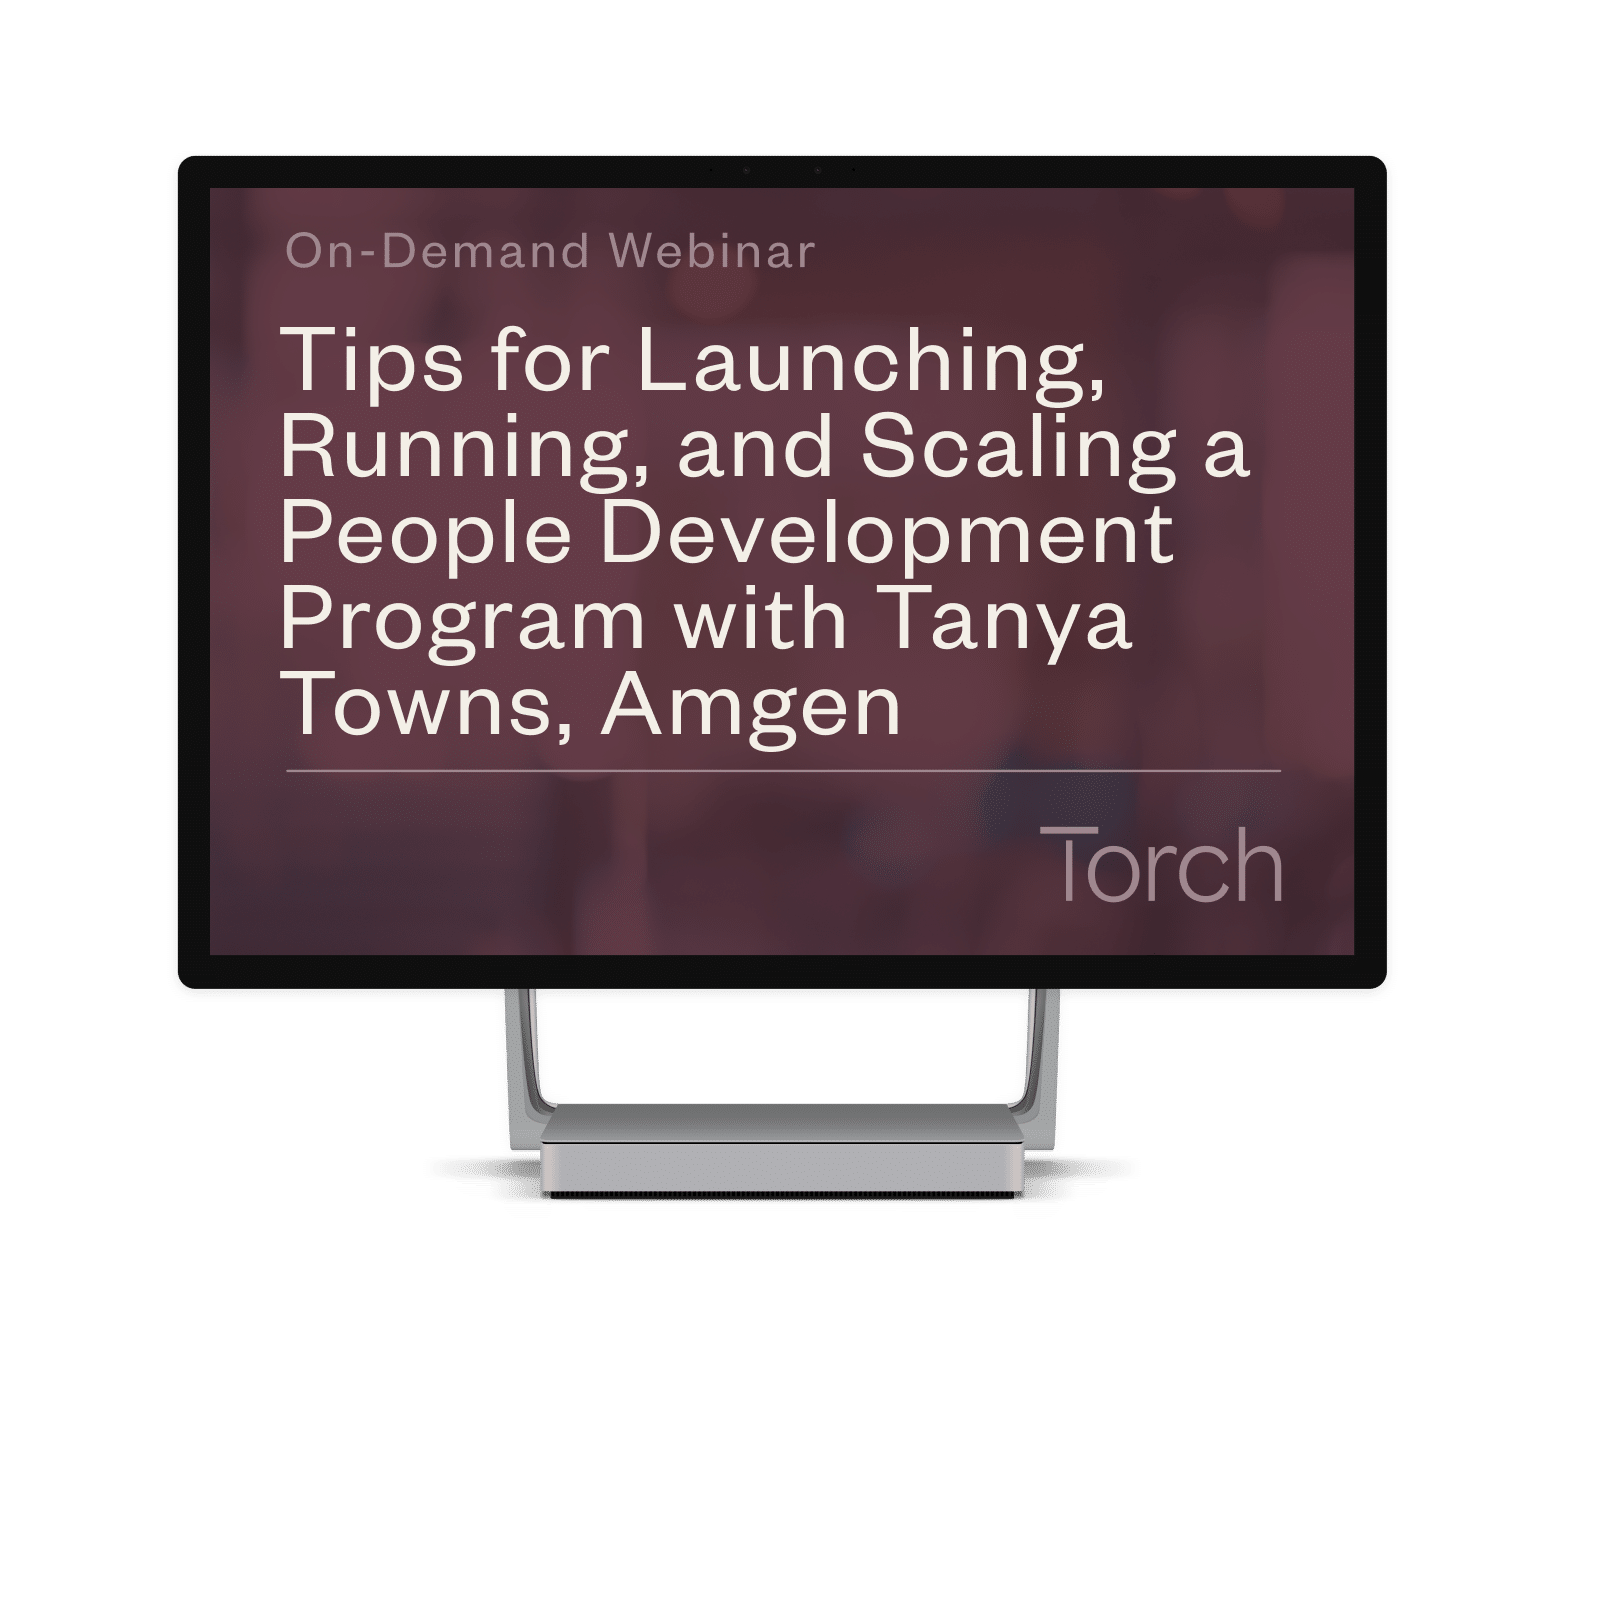 Tips for Launching, Running, and Scaling Your People Development Programs, featuring Tanya Towns of Amgen